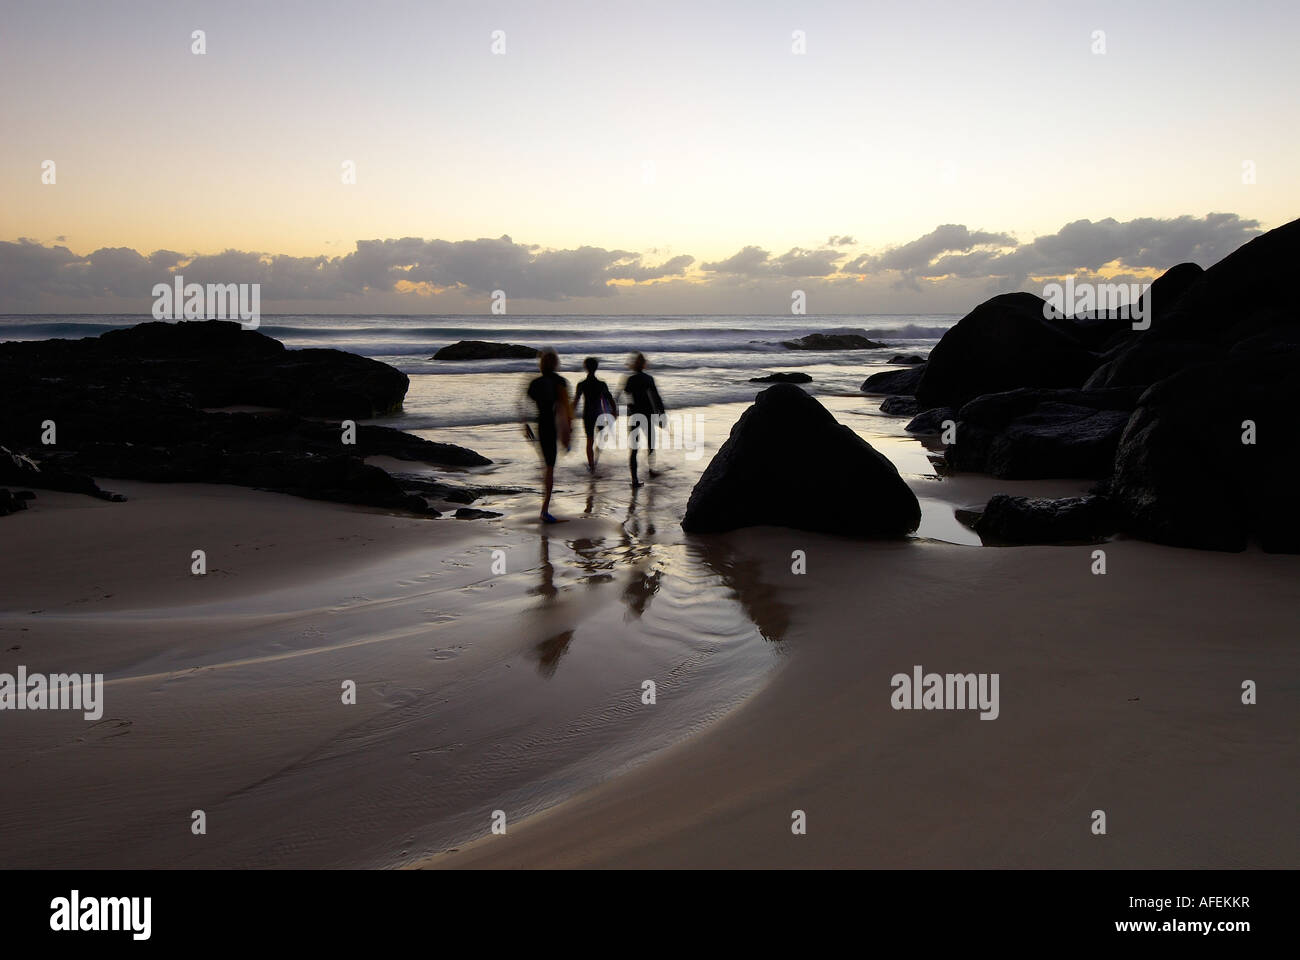 Surf board riders going for dawn ride at Little Cove on the Gold Coast Australia Stock Photo